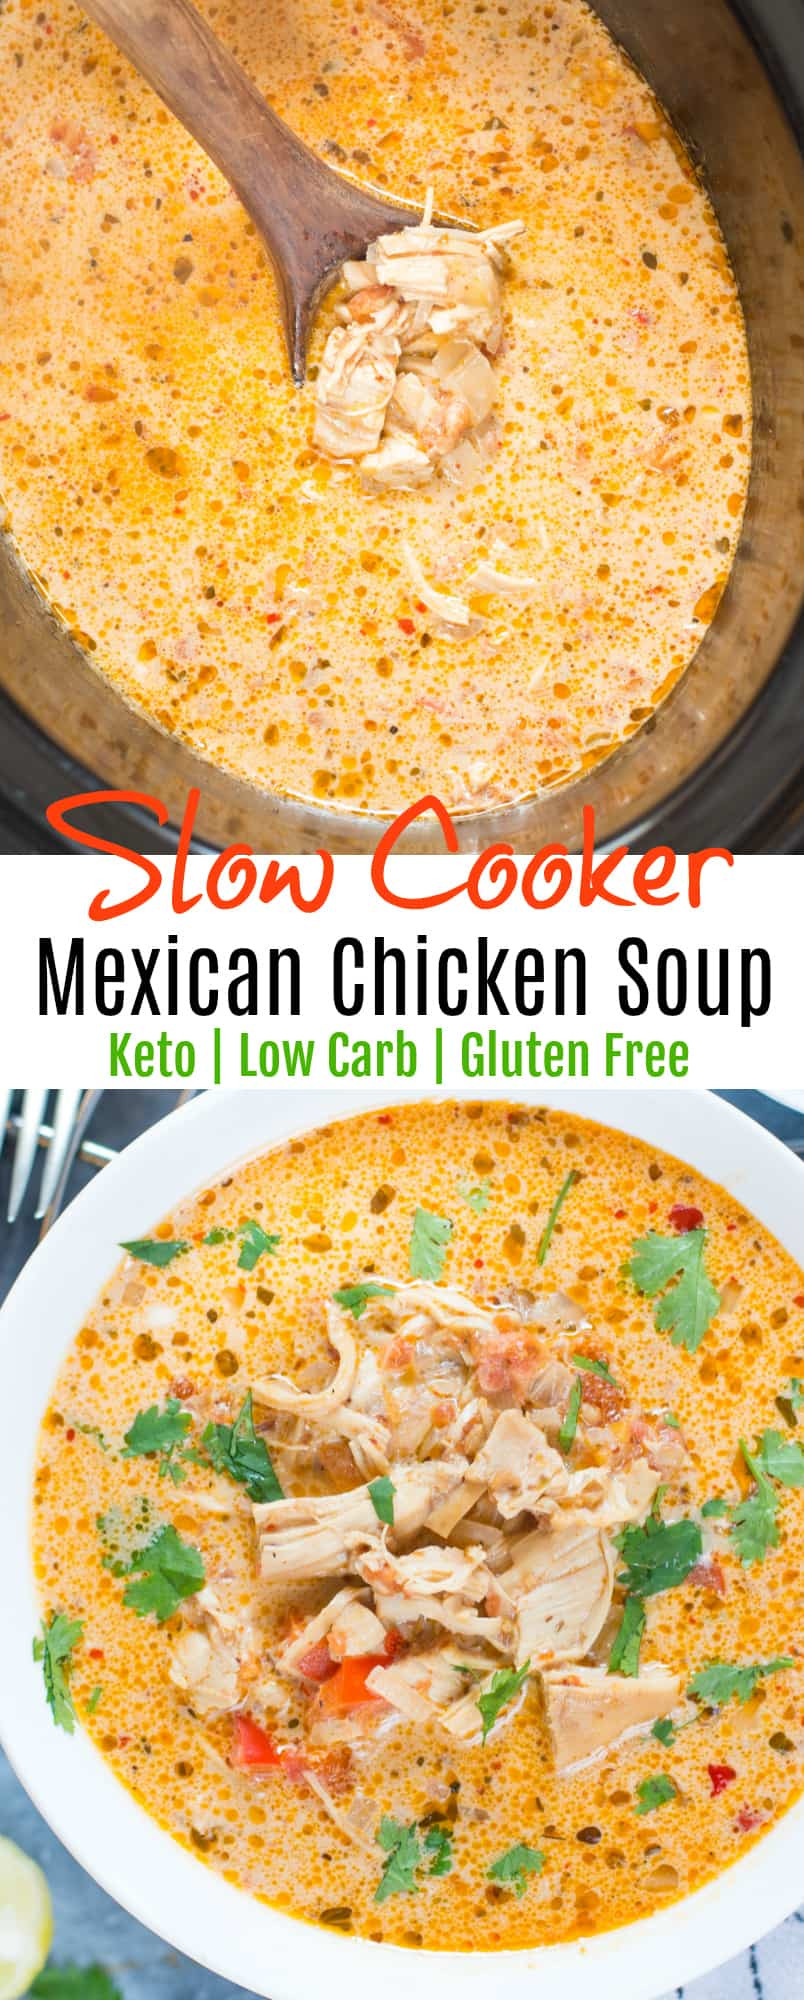 Slow Cooker Keto Chicken Recipes
 SLOW COOKER MEXICAN CHICKEN SOUP The flavours of kitchen